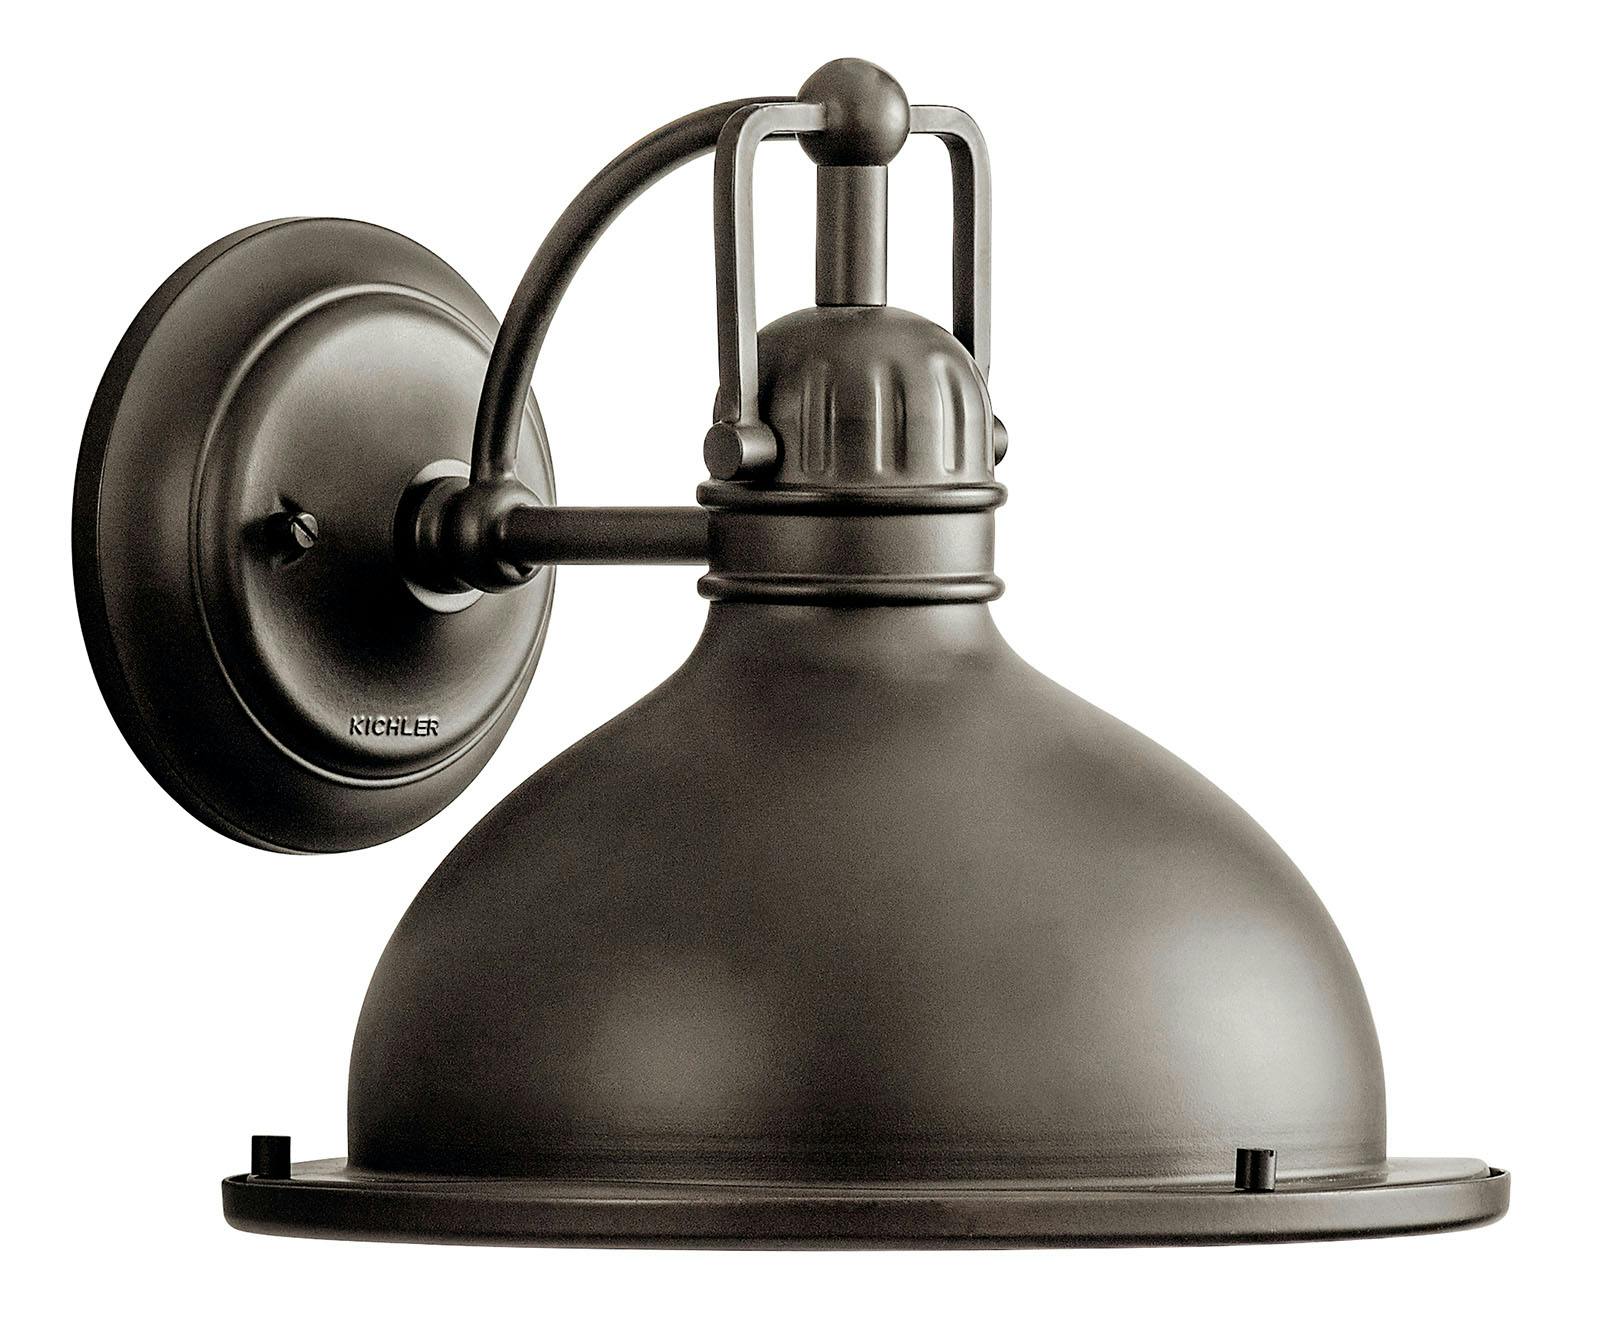 Dome shaped wall light in a medium bronze color